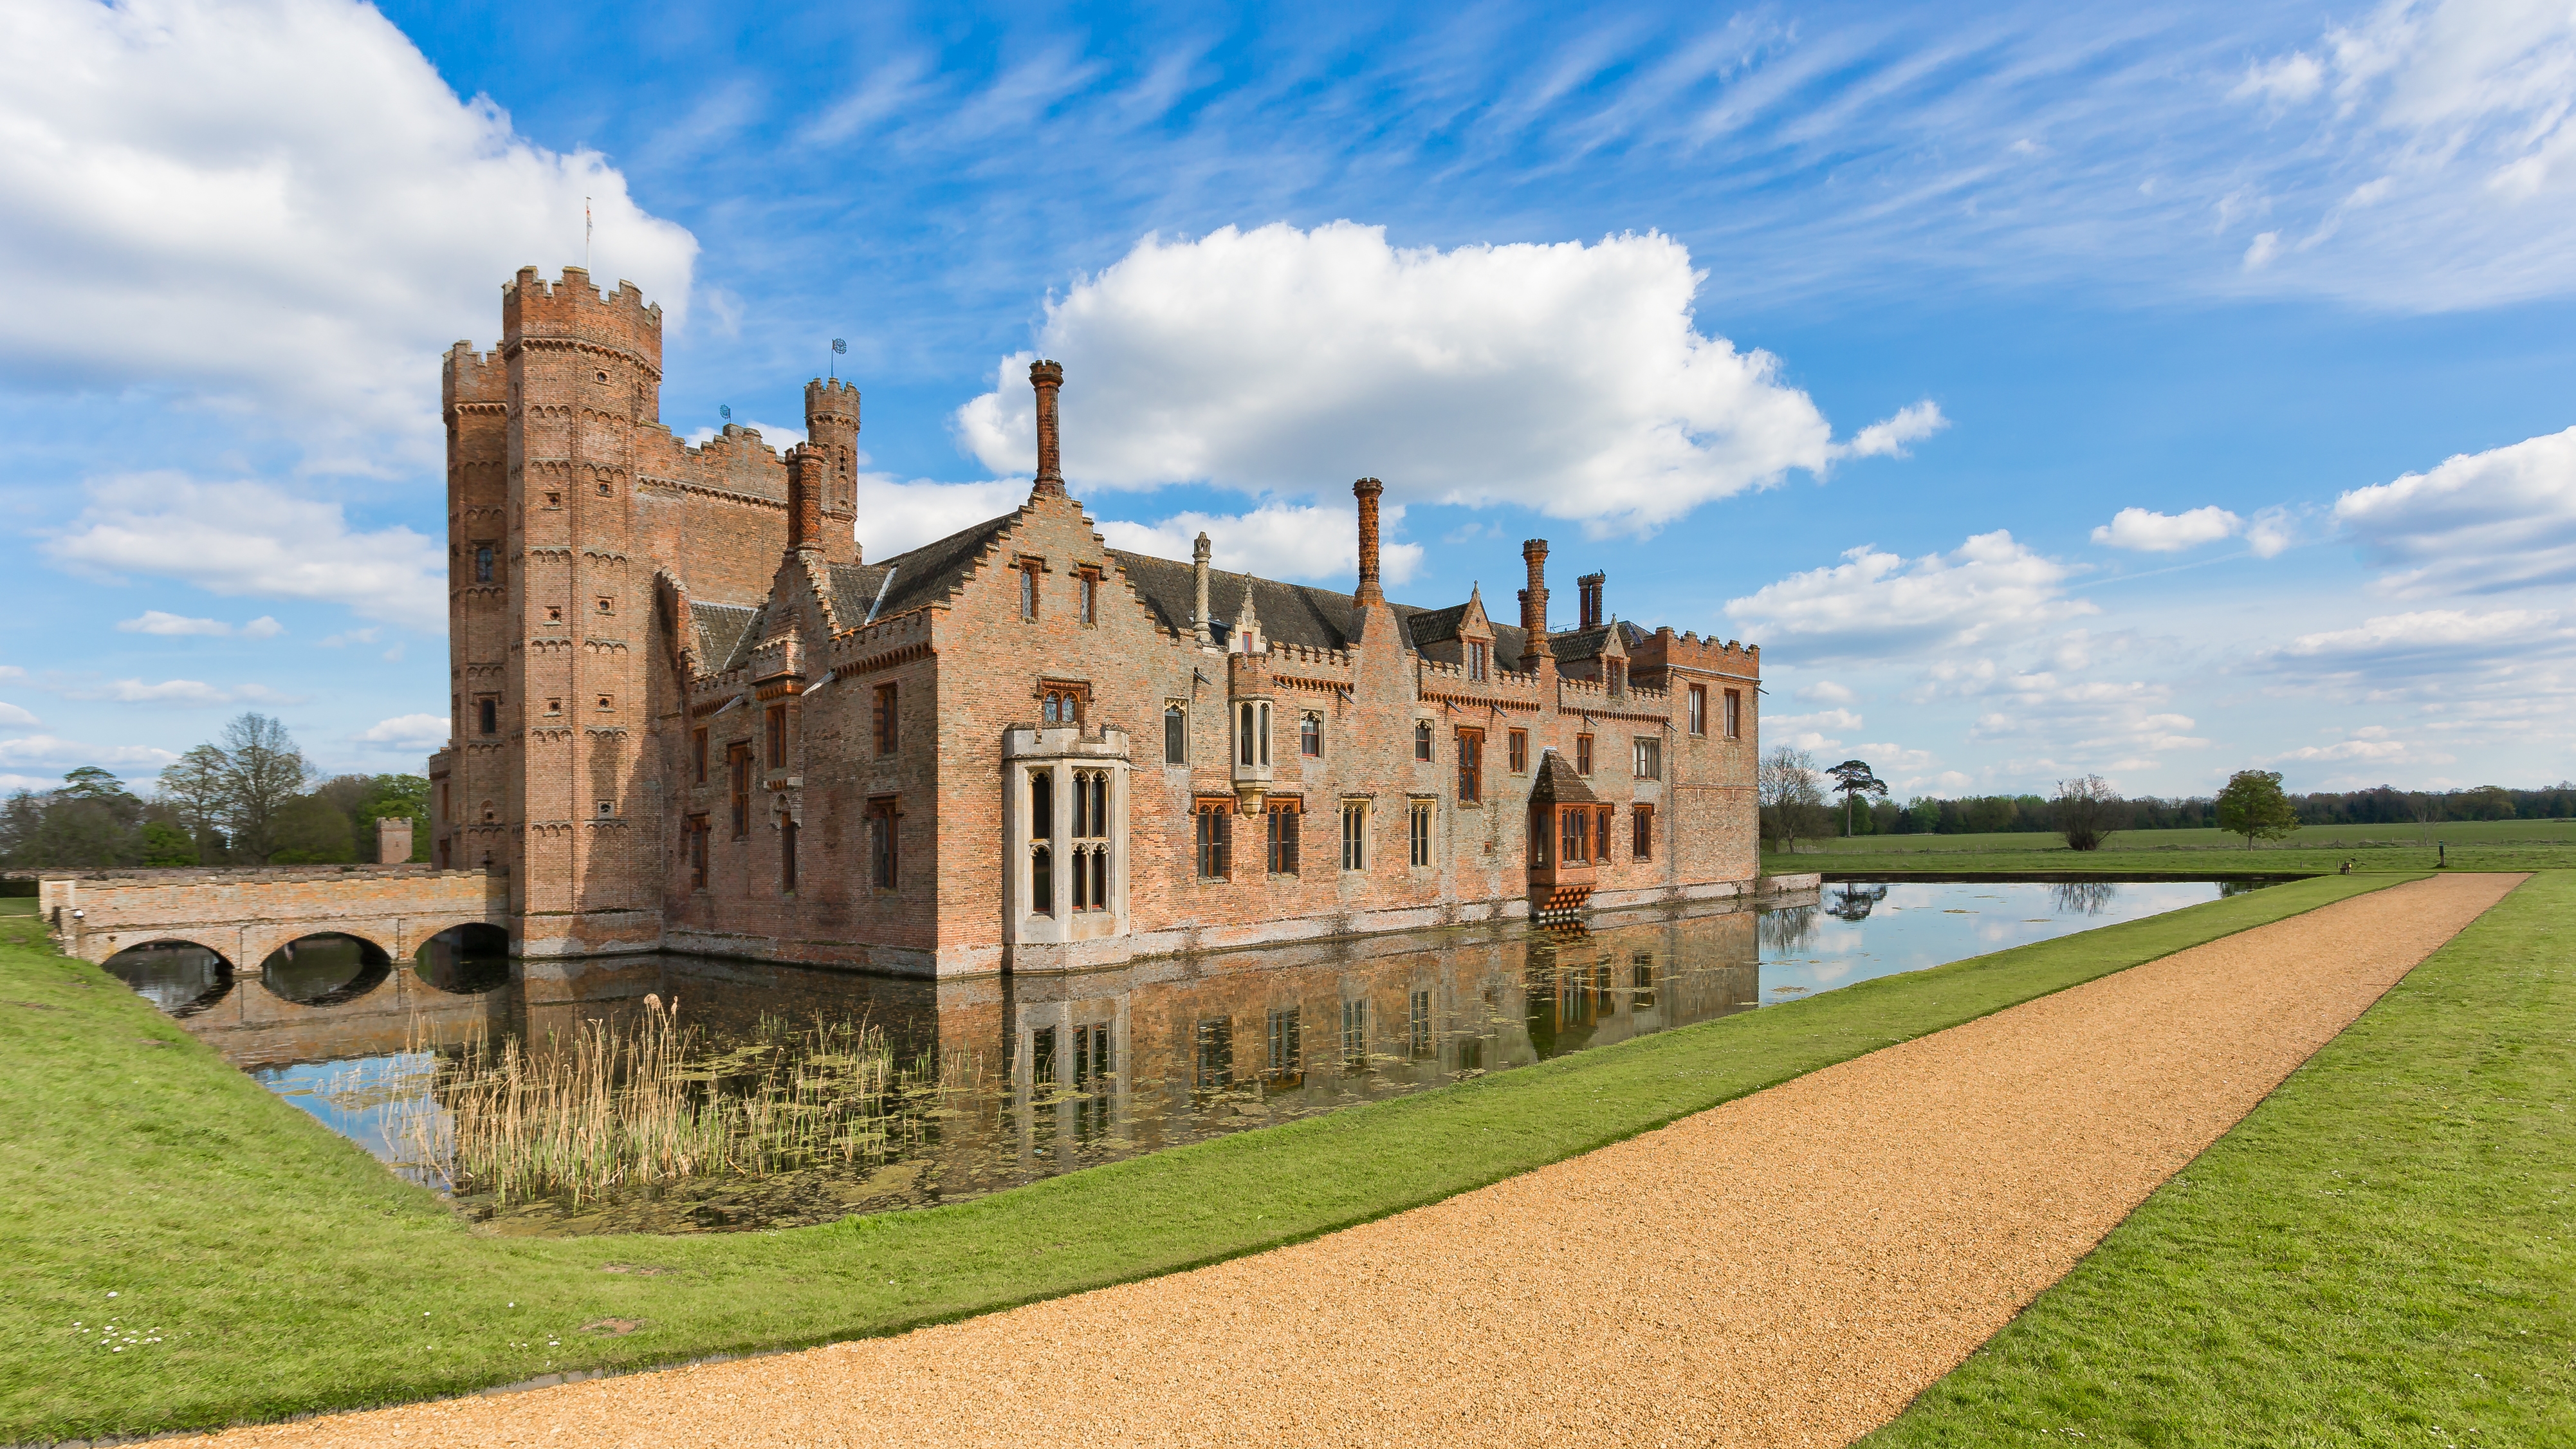 Explore Oxburgh Hall, National Trust in Norfolk with their all terrain wheelchair